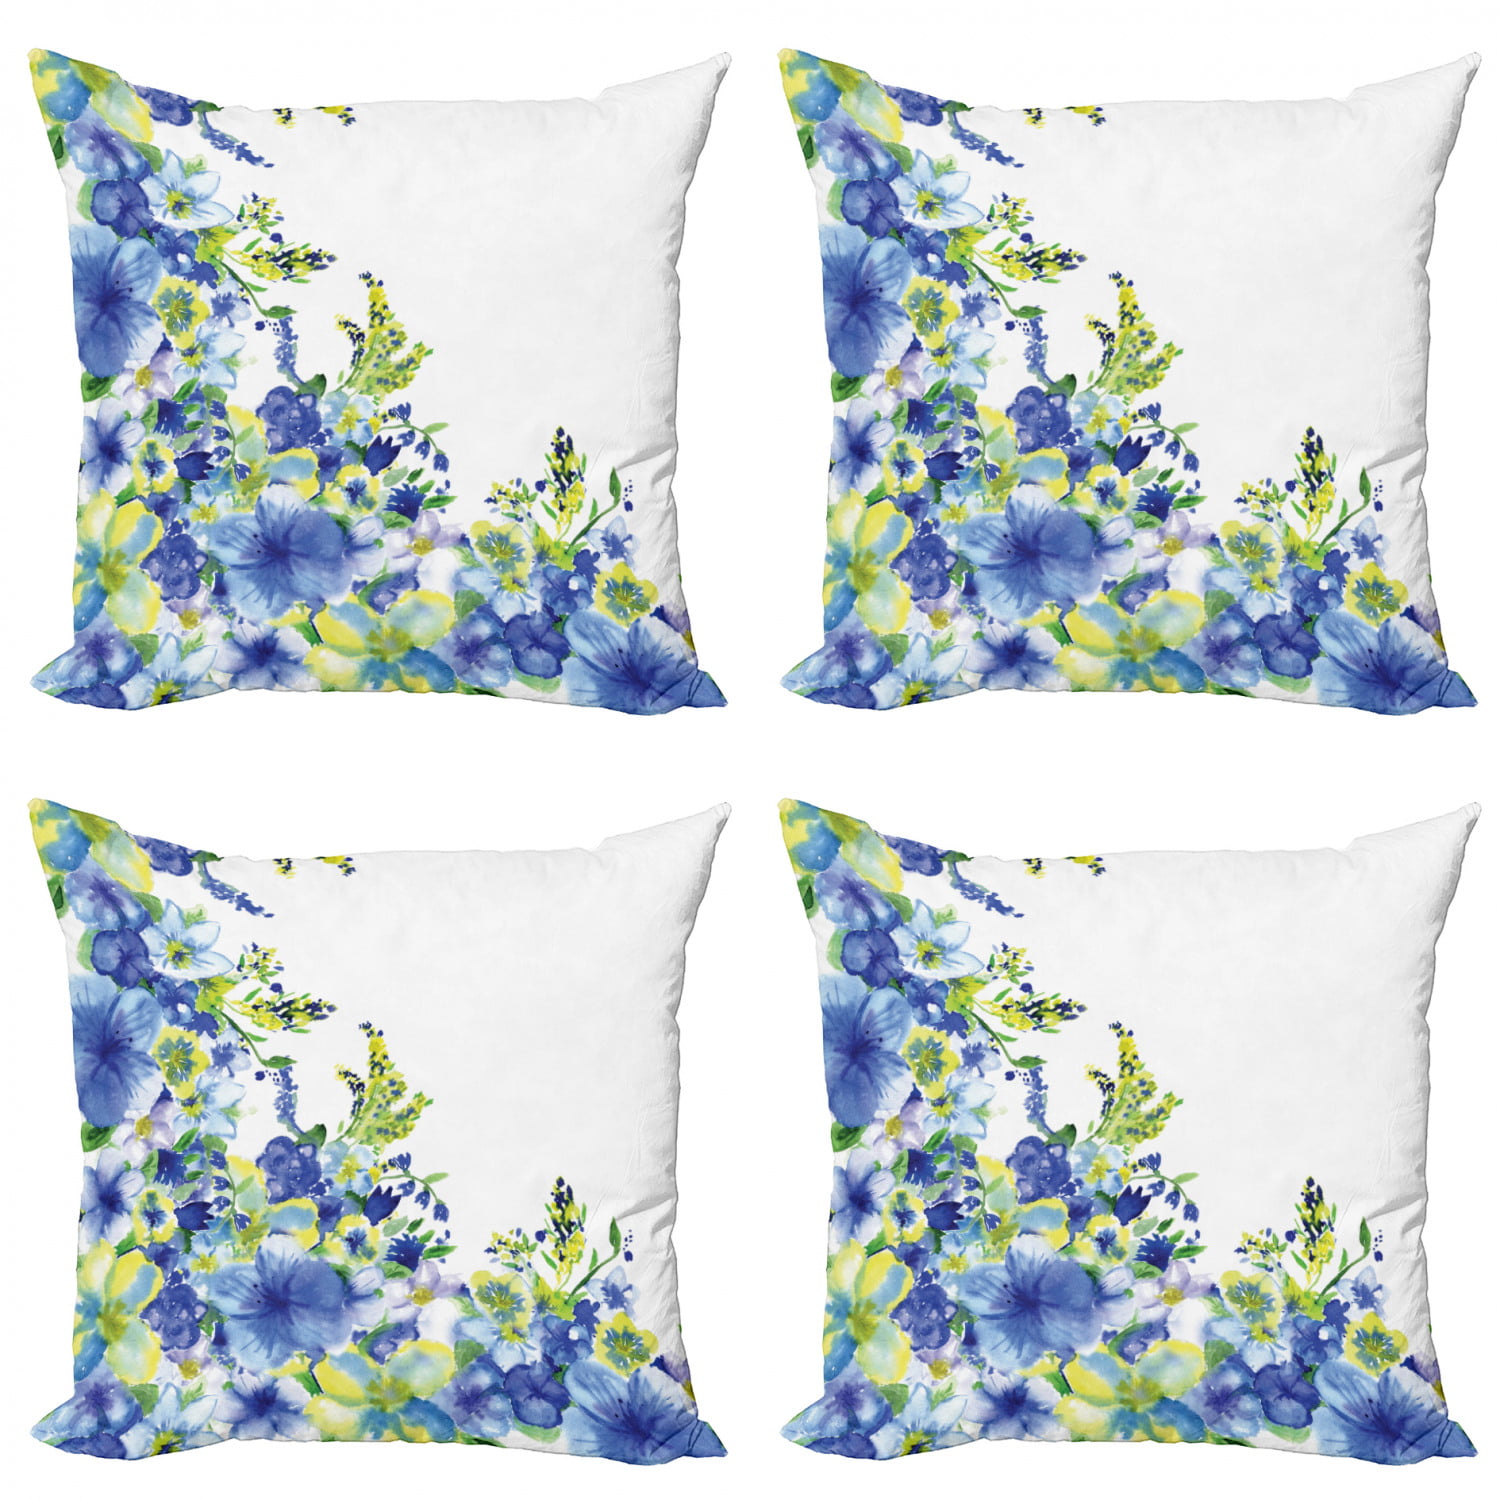 Decorative Square Accent Pillow Case Ambesonne Watercolor Flower Throw Pillow Cushion Cover Blue Yellow Motley Floret Motifs with Splash Anemone Iris Revival of Nature Theme 18 X 18